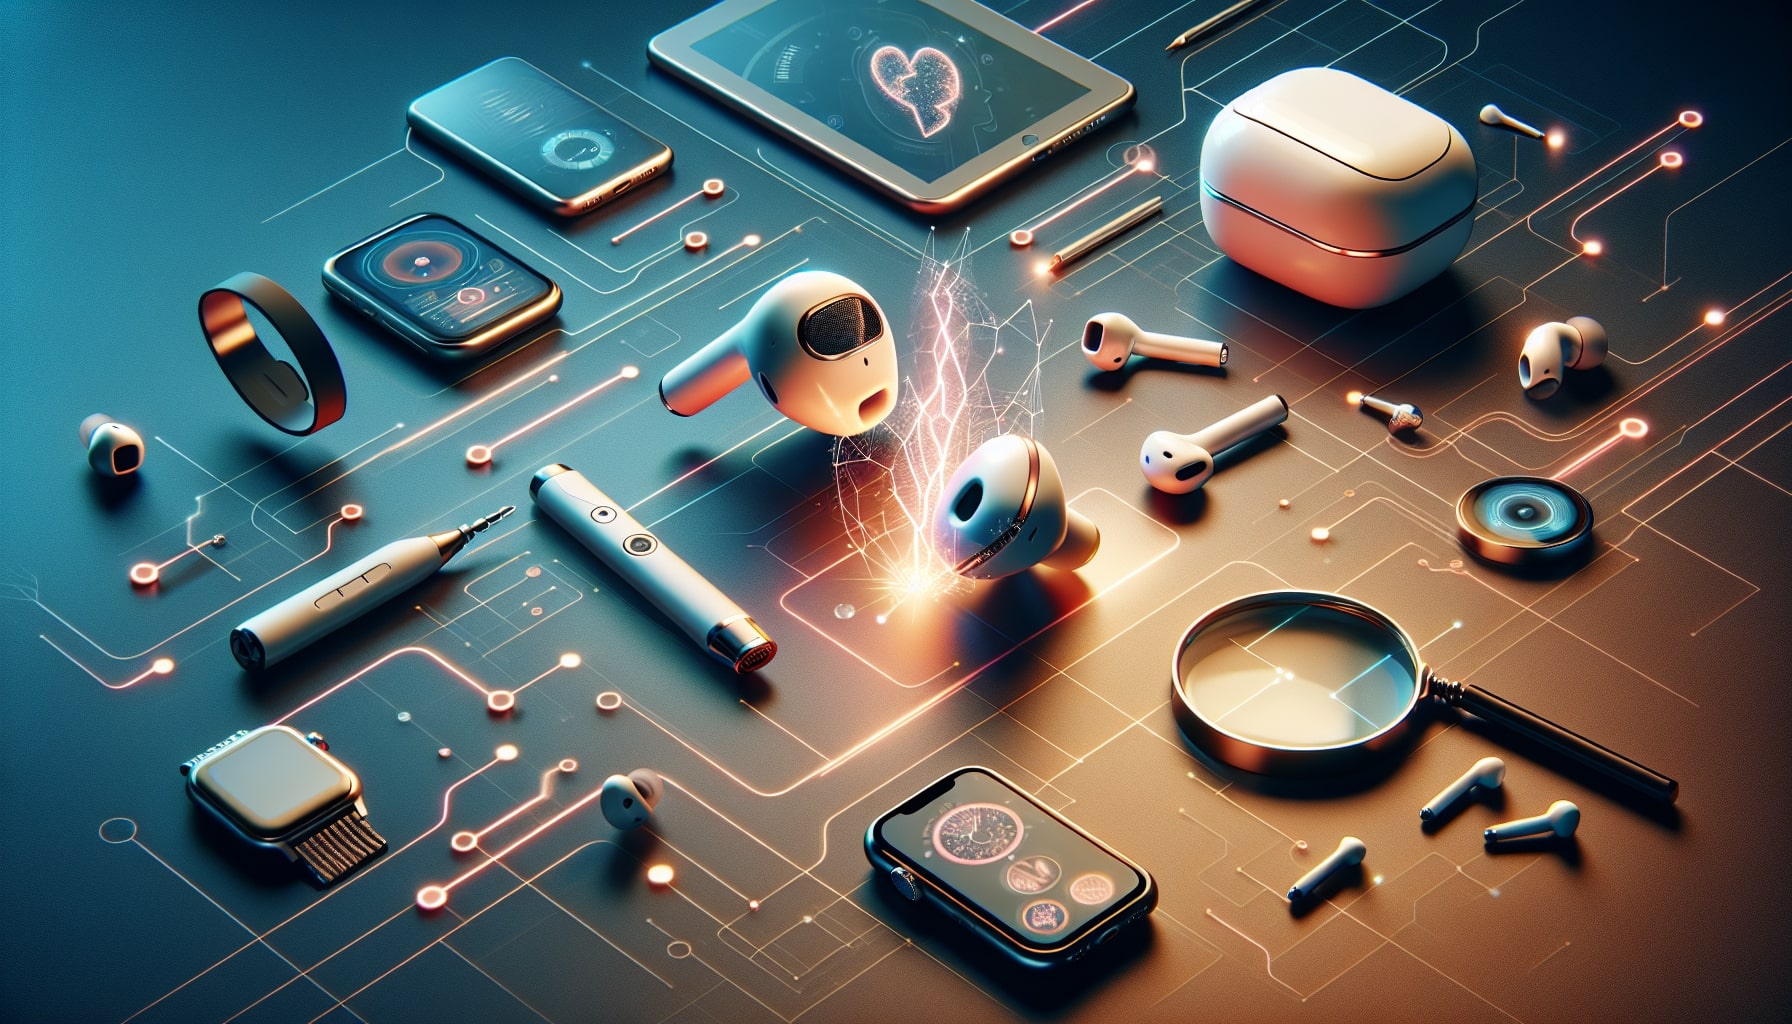 Futuristic gadgets and devices with digital connections.